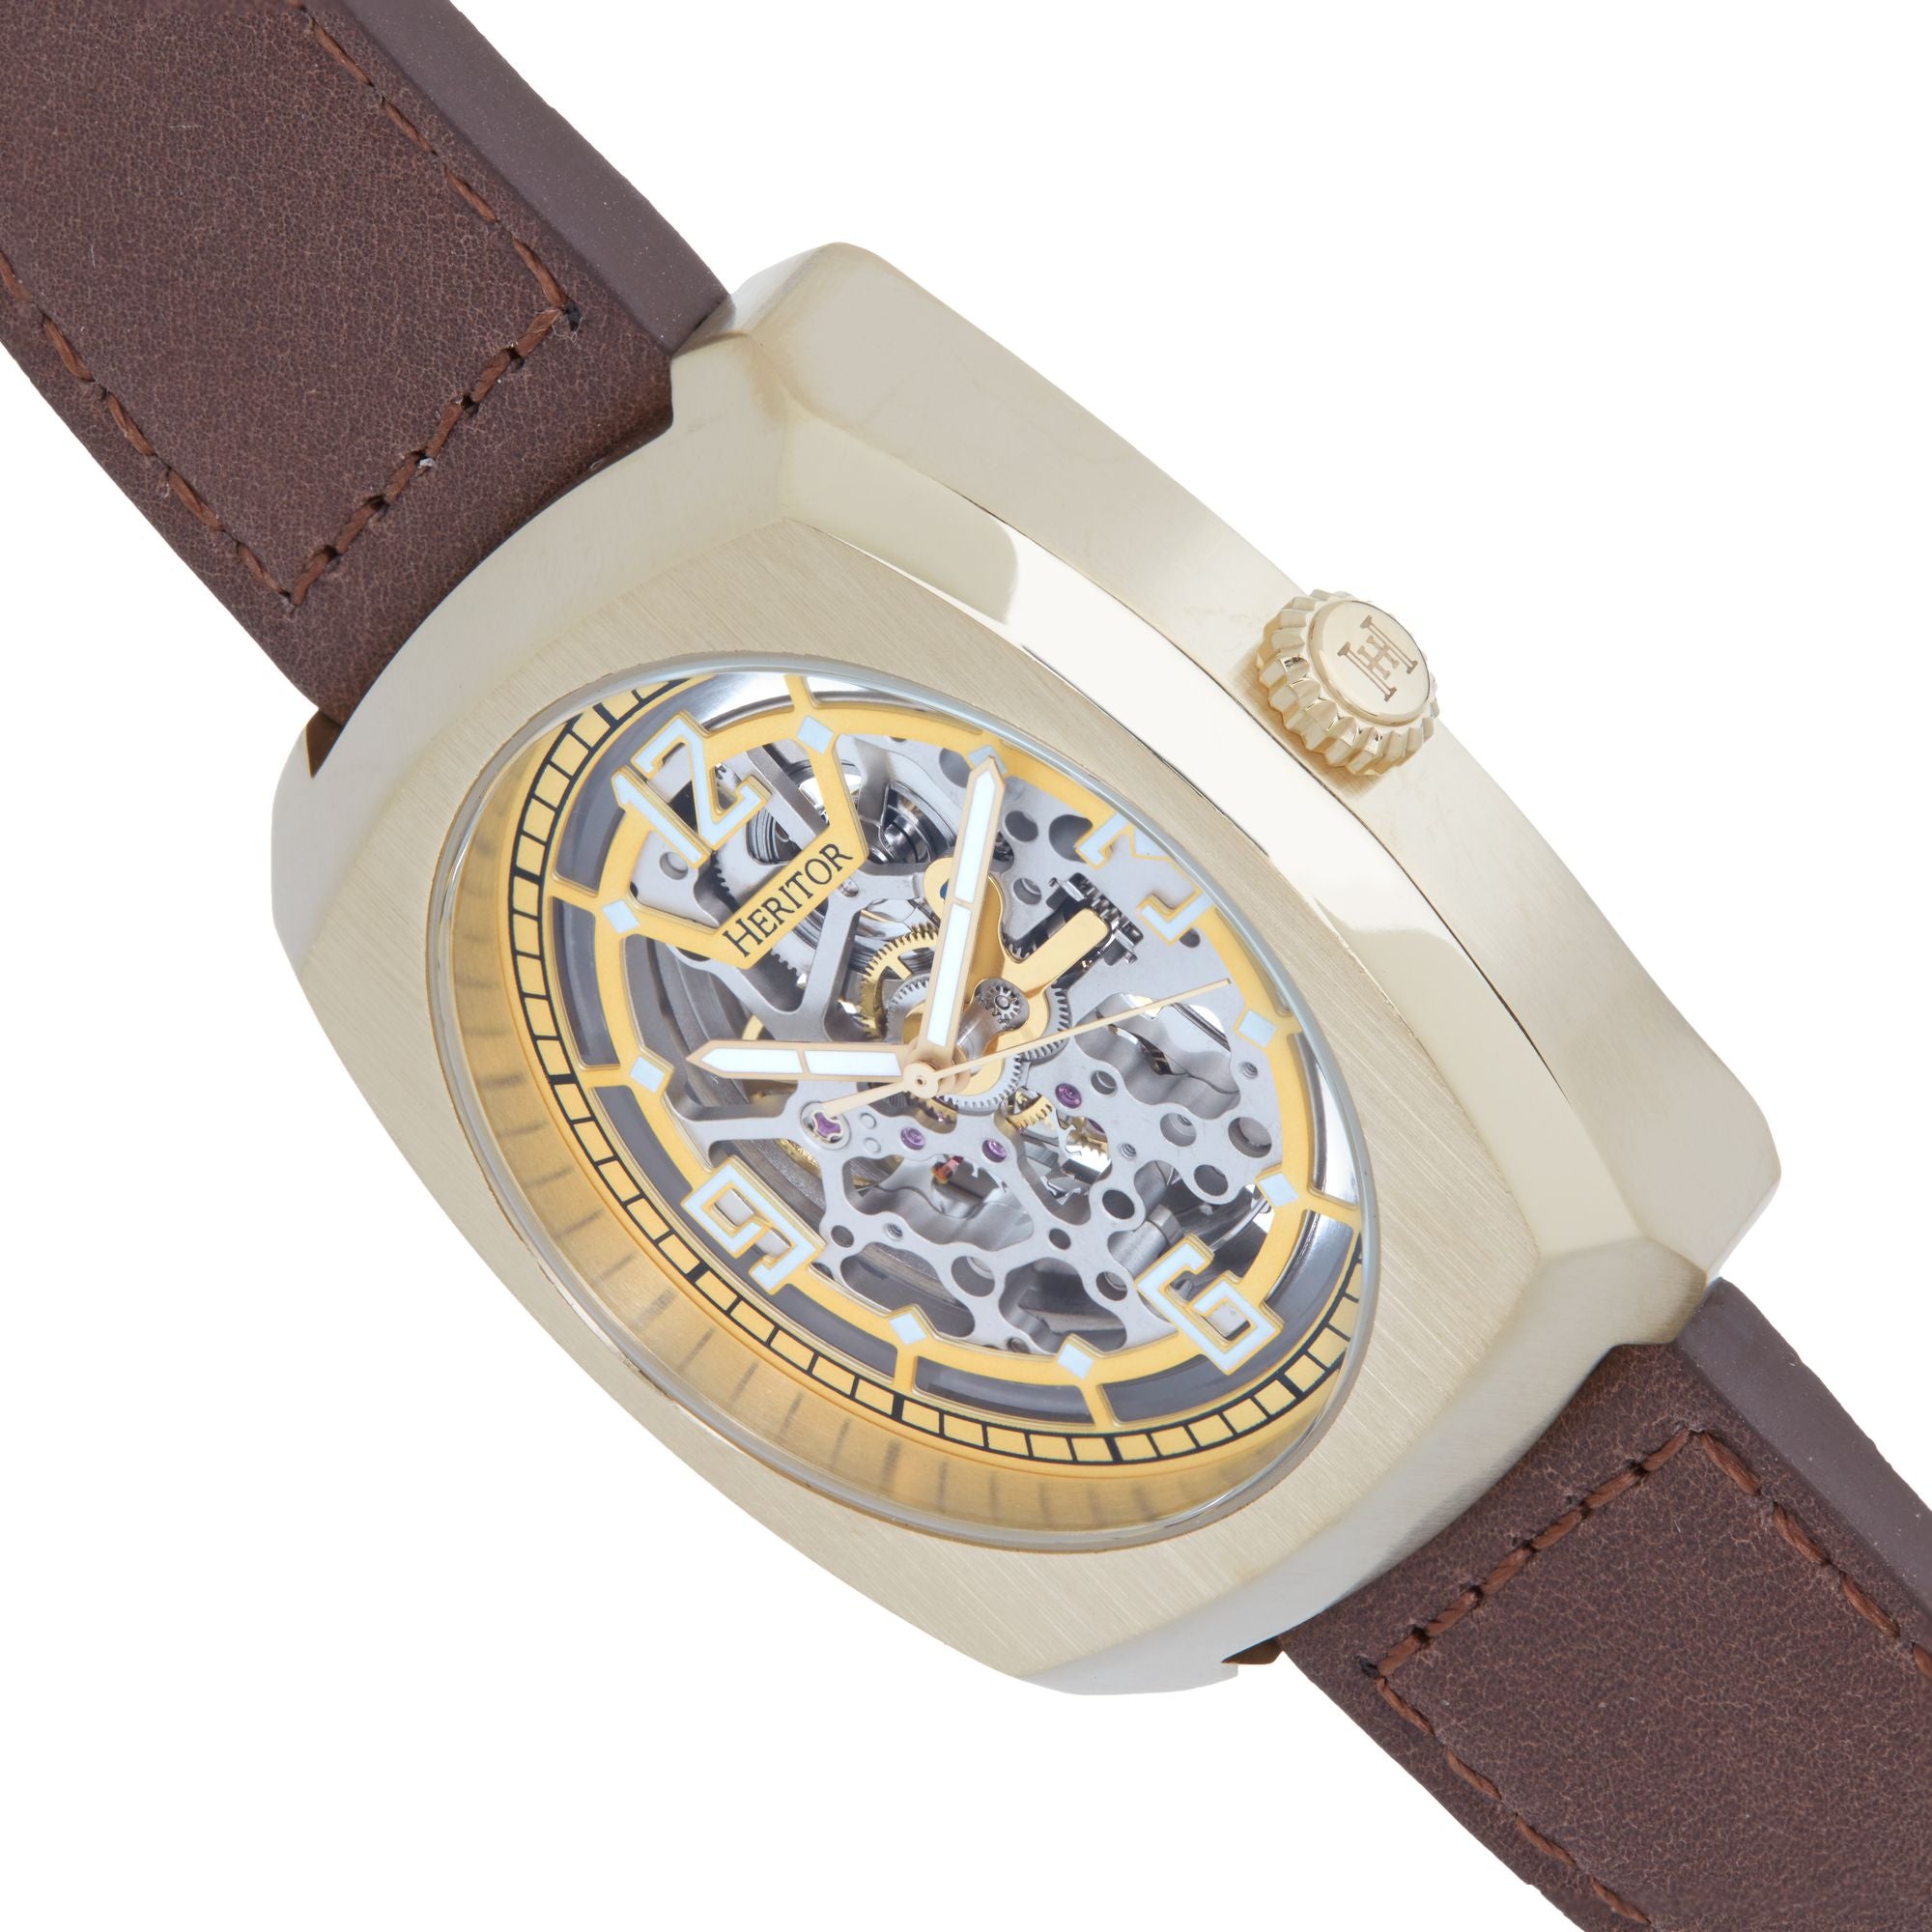 Heritor Automatic Gatling Skeletonized Leather-Band Watch - Gold/Brown - HERHS2303